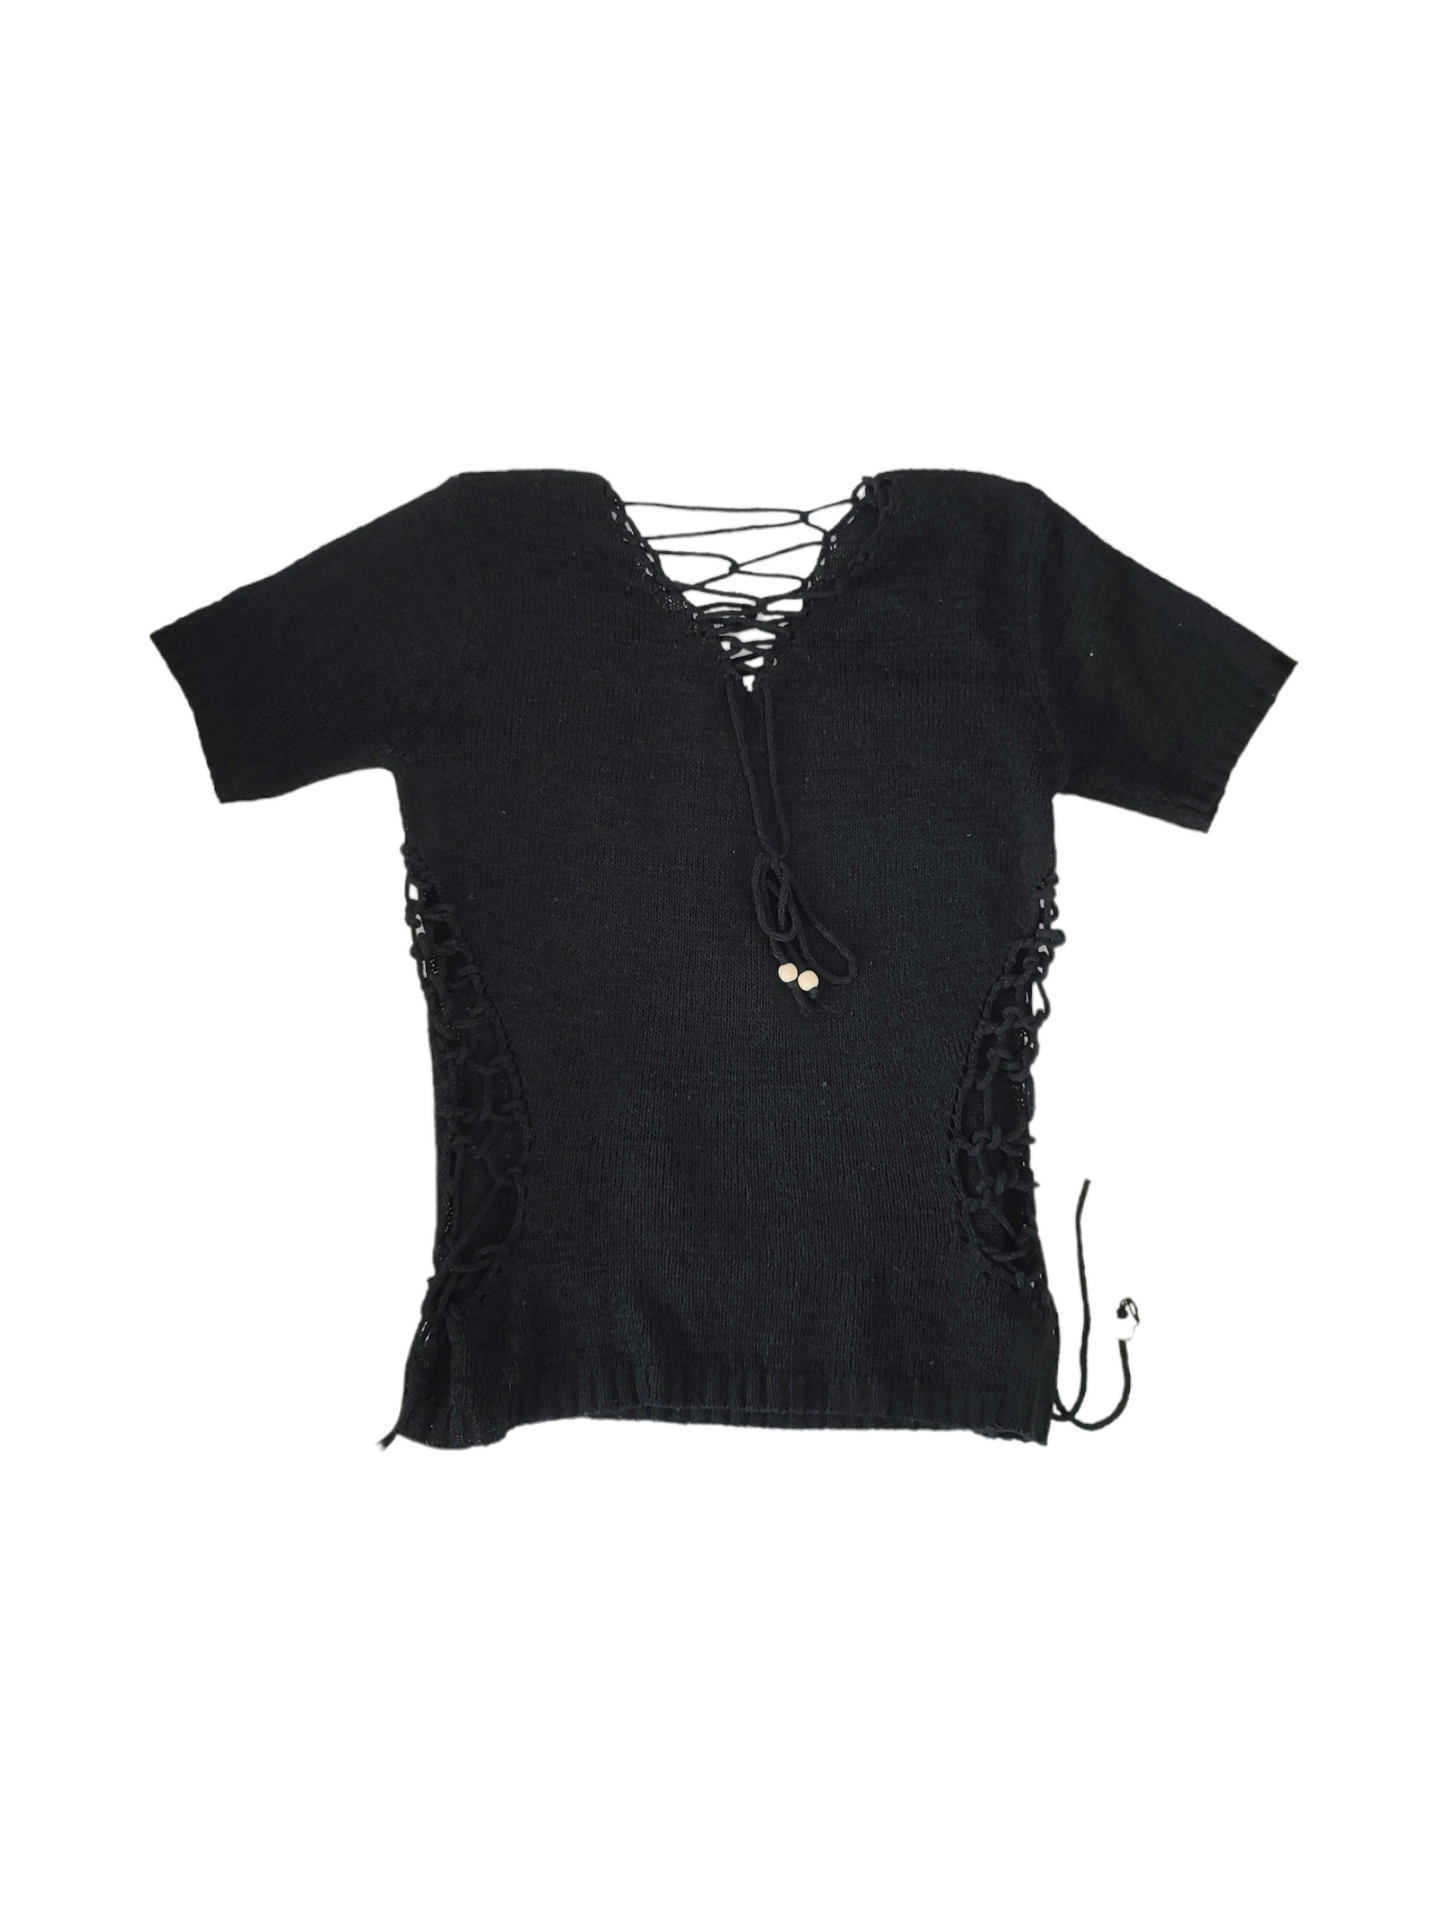 Fairy lace up y2k top